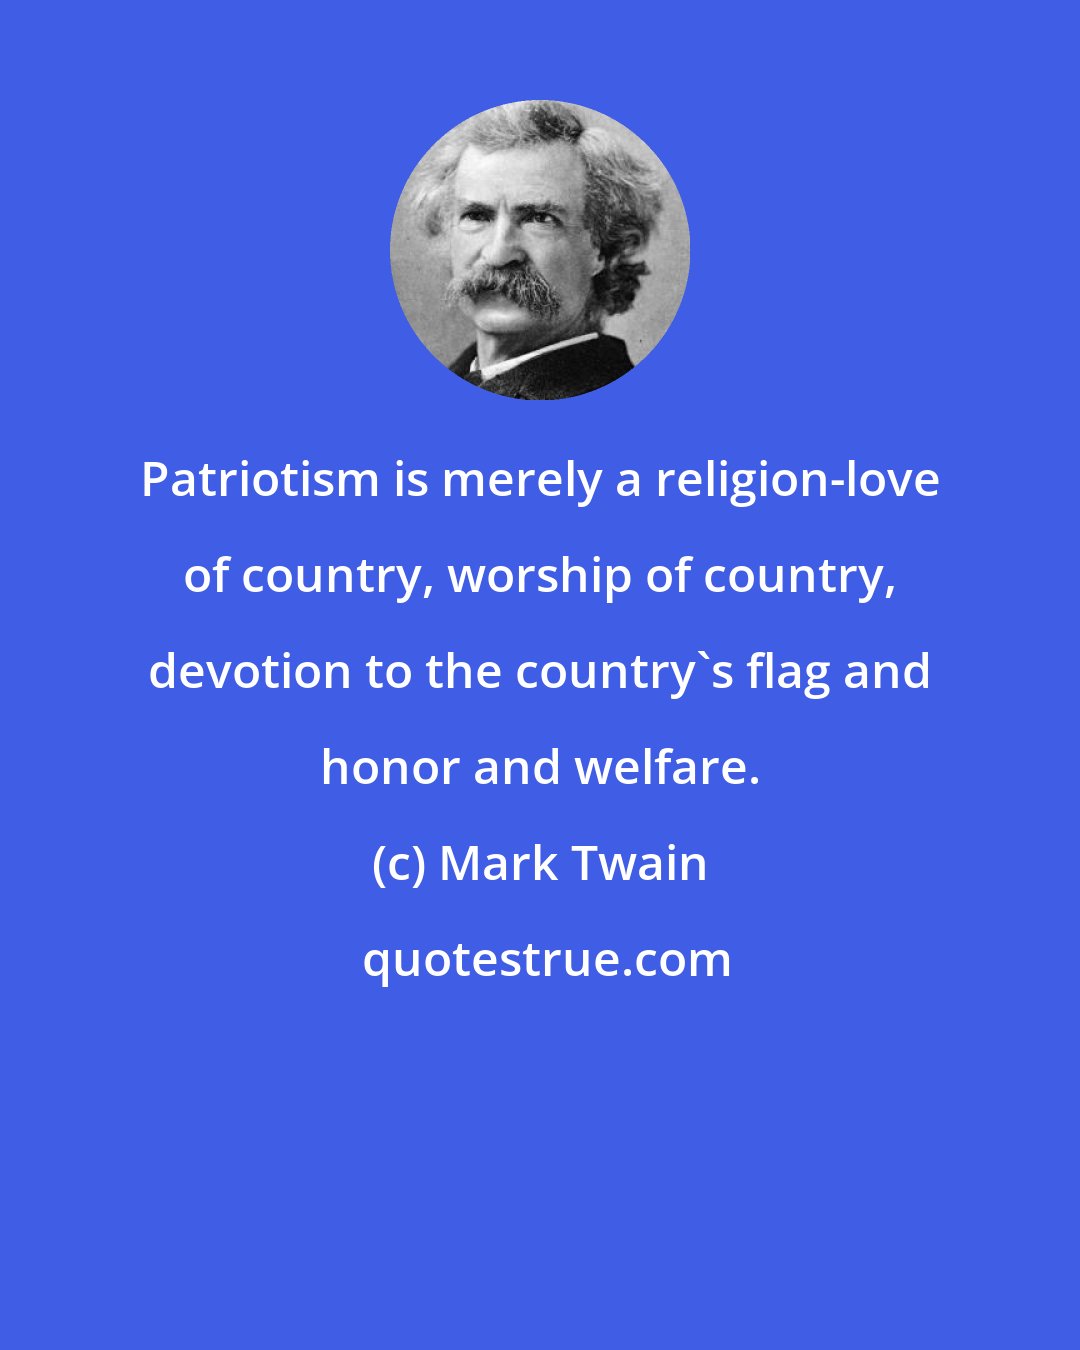 Mark Twain: Patriotism is merely a religion-love of country, worship of country, devotion to the country's flag and honor and welfare.